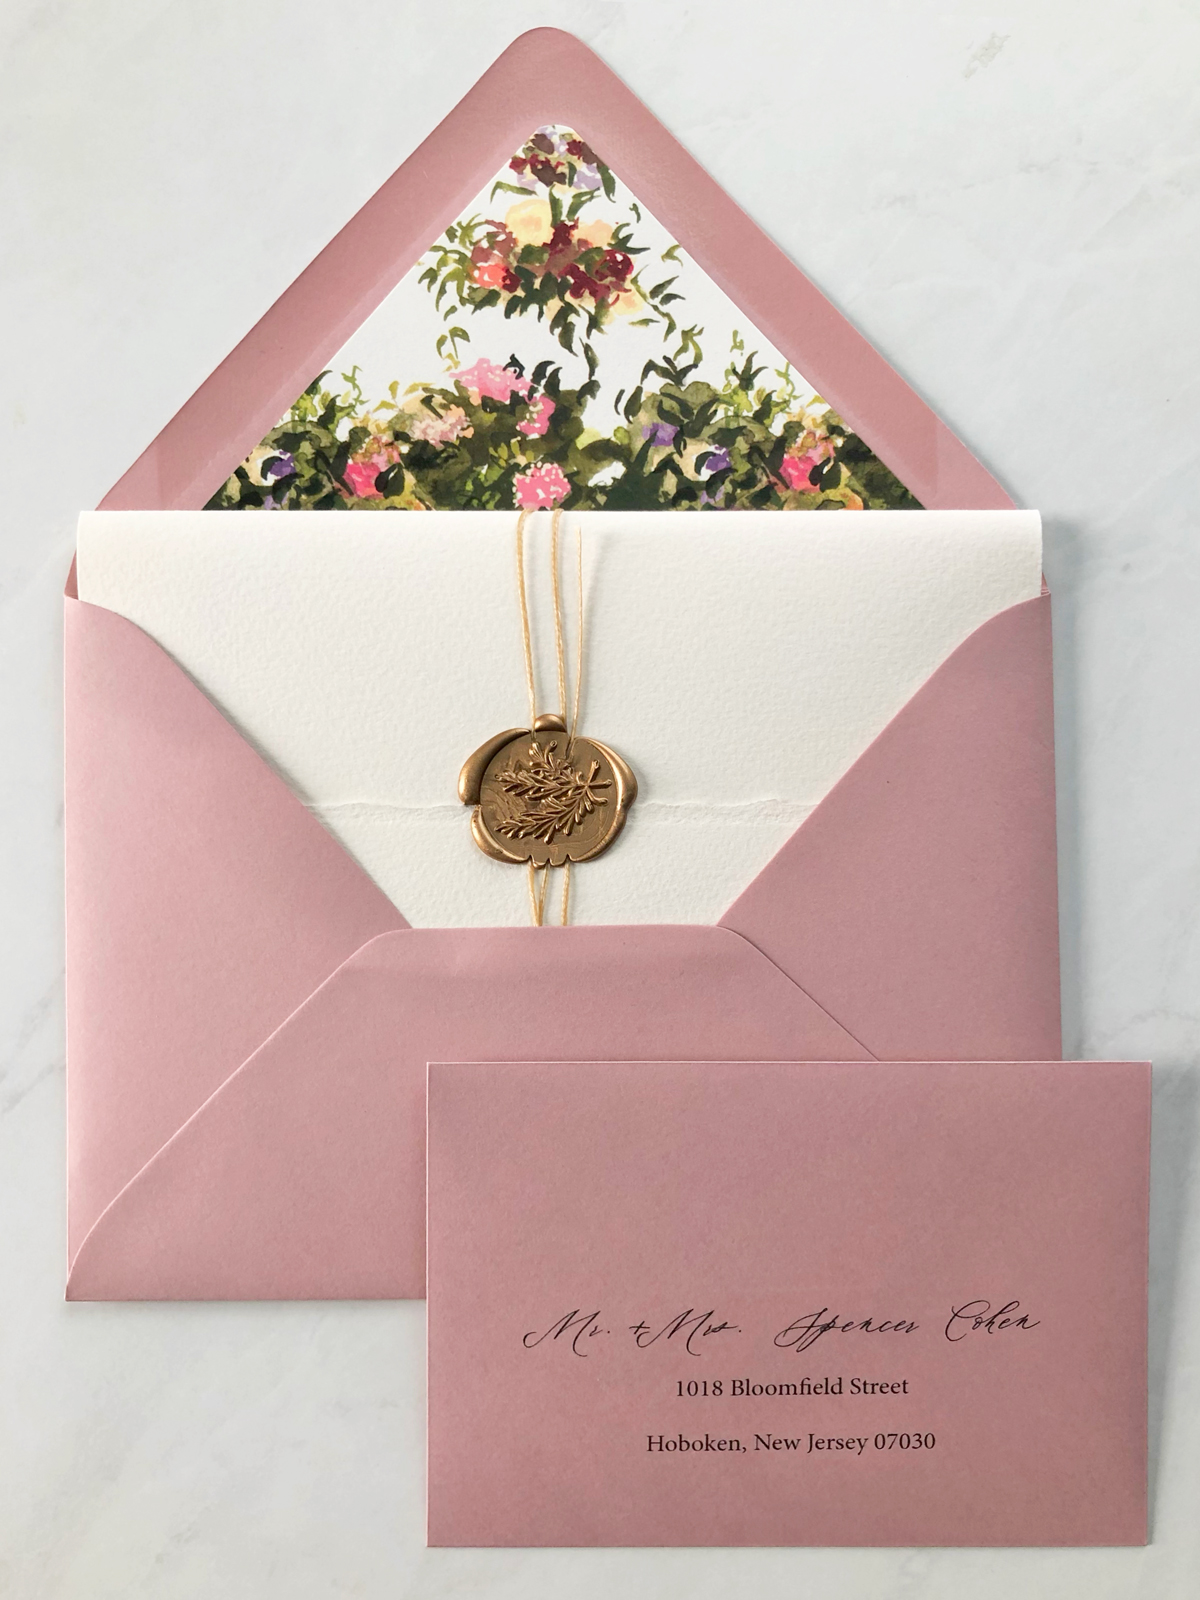 jolly edition wedding stationery: letterpress, wax seal, book binding, custom liner, and mauve envelope